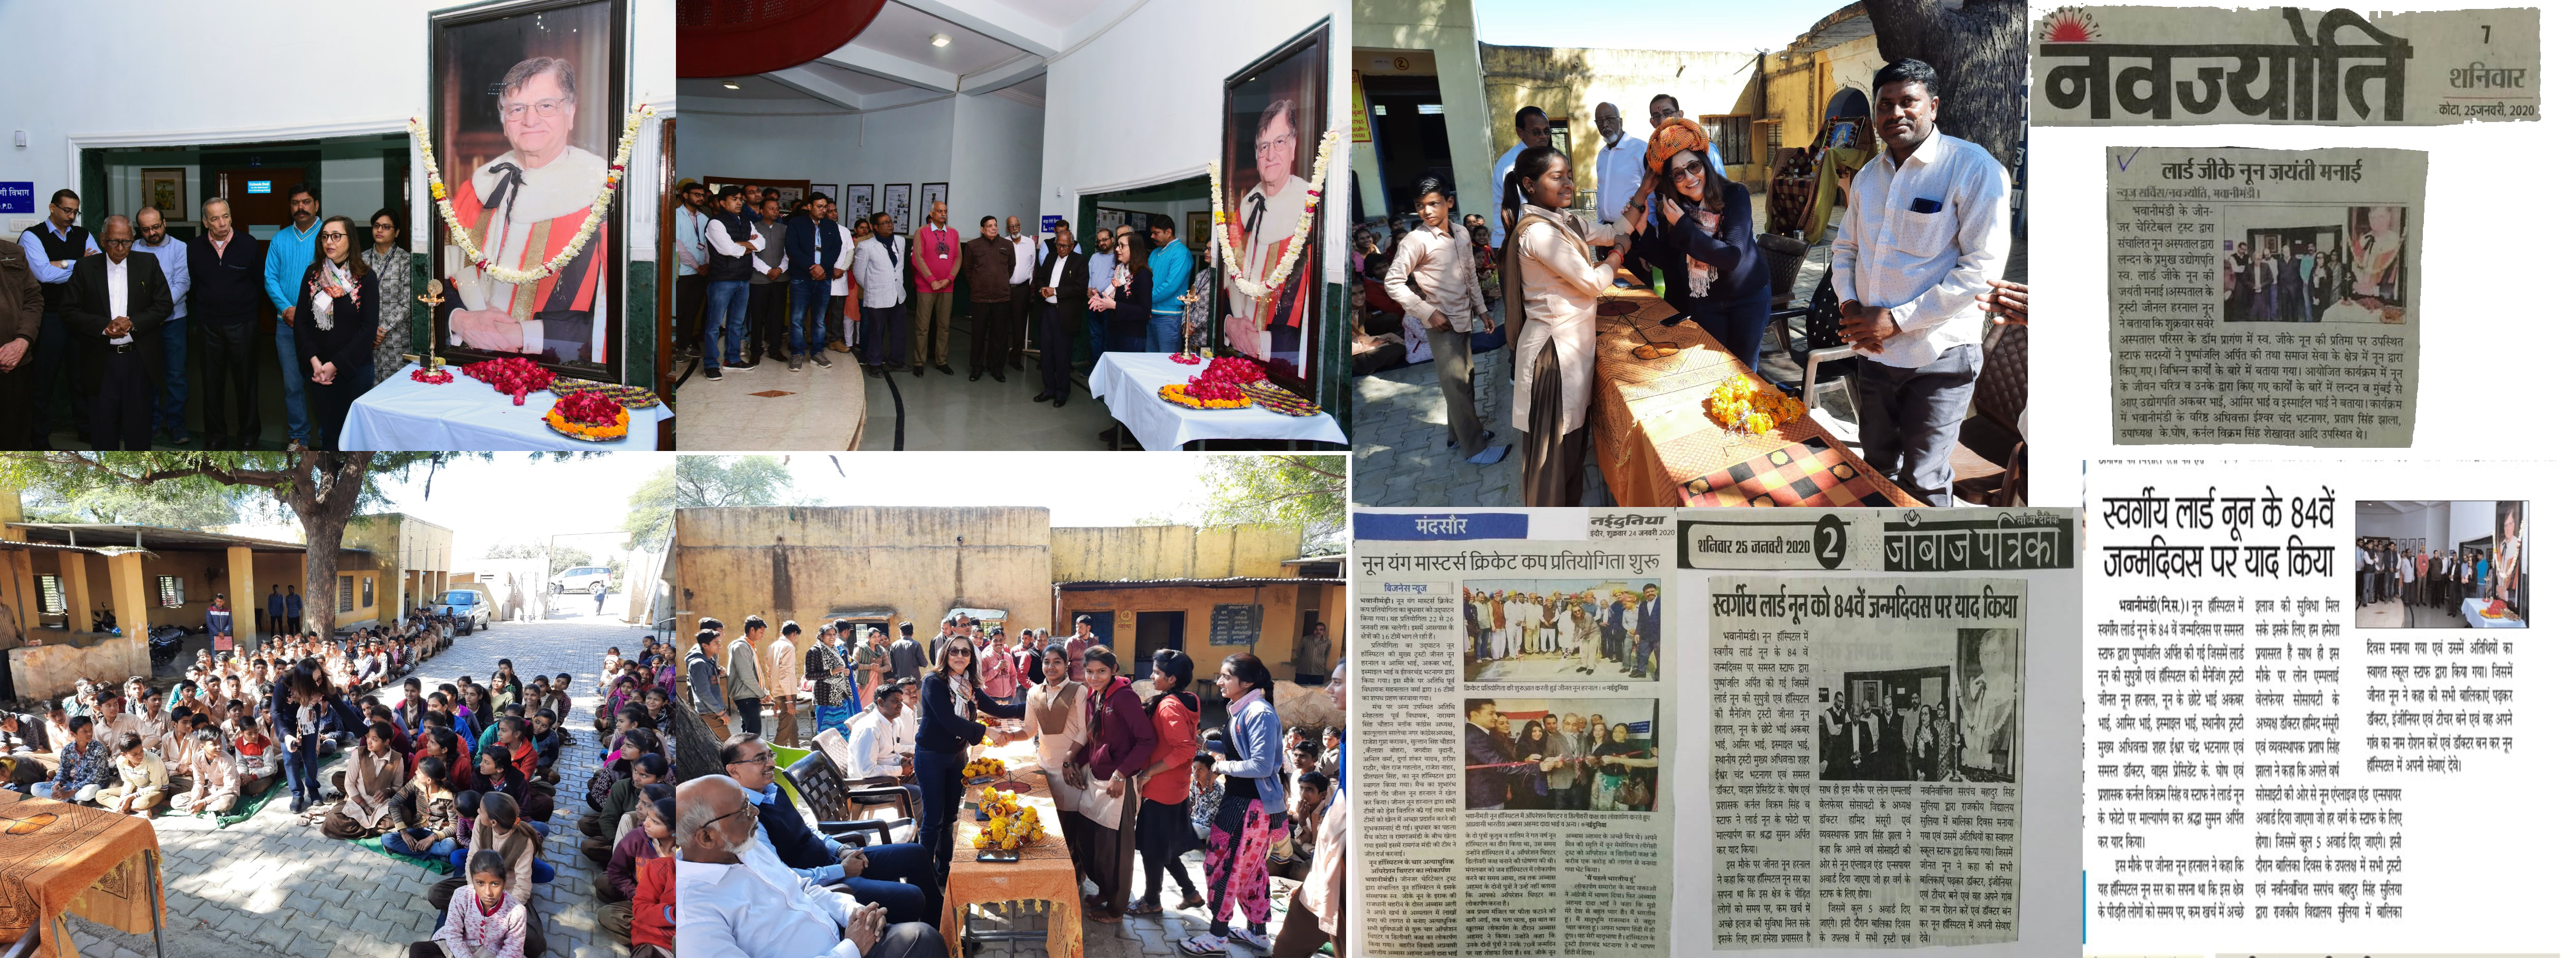 Noon Hospital Celebrated the 84th Birthday of Lord Noon